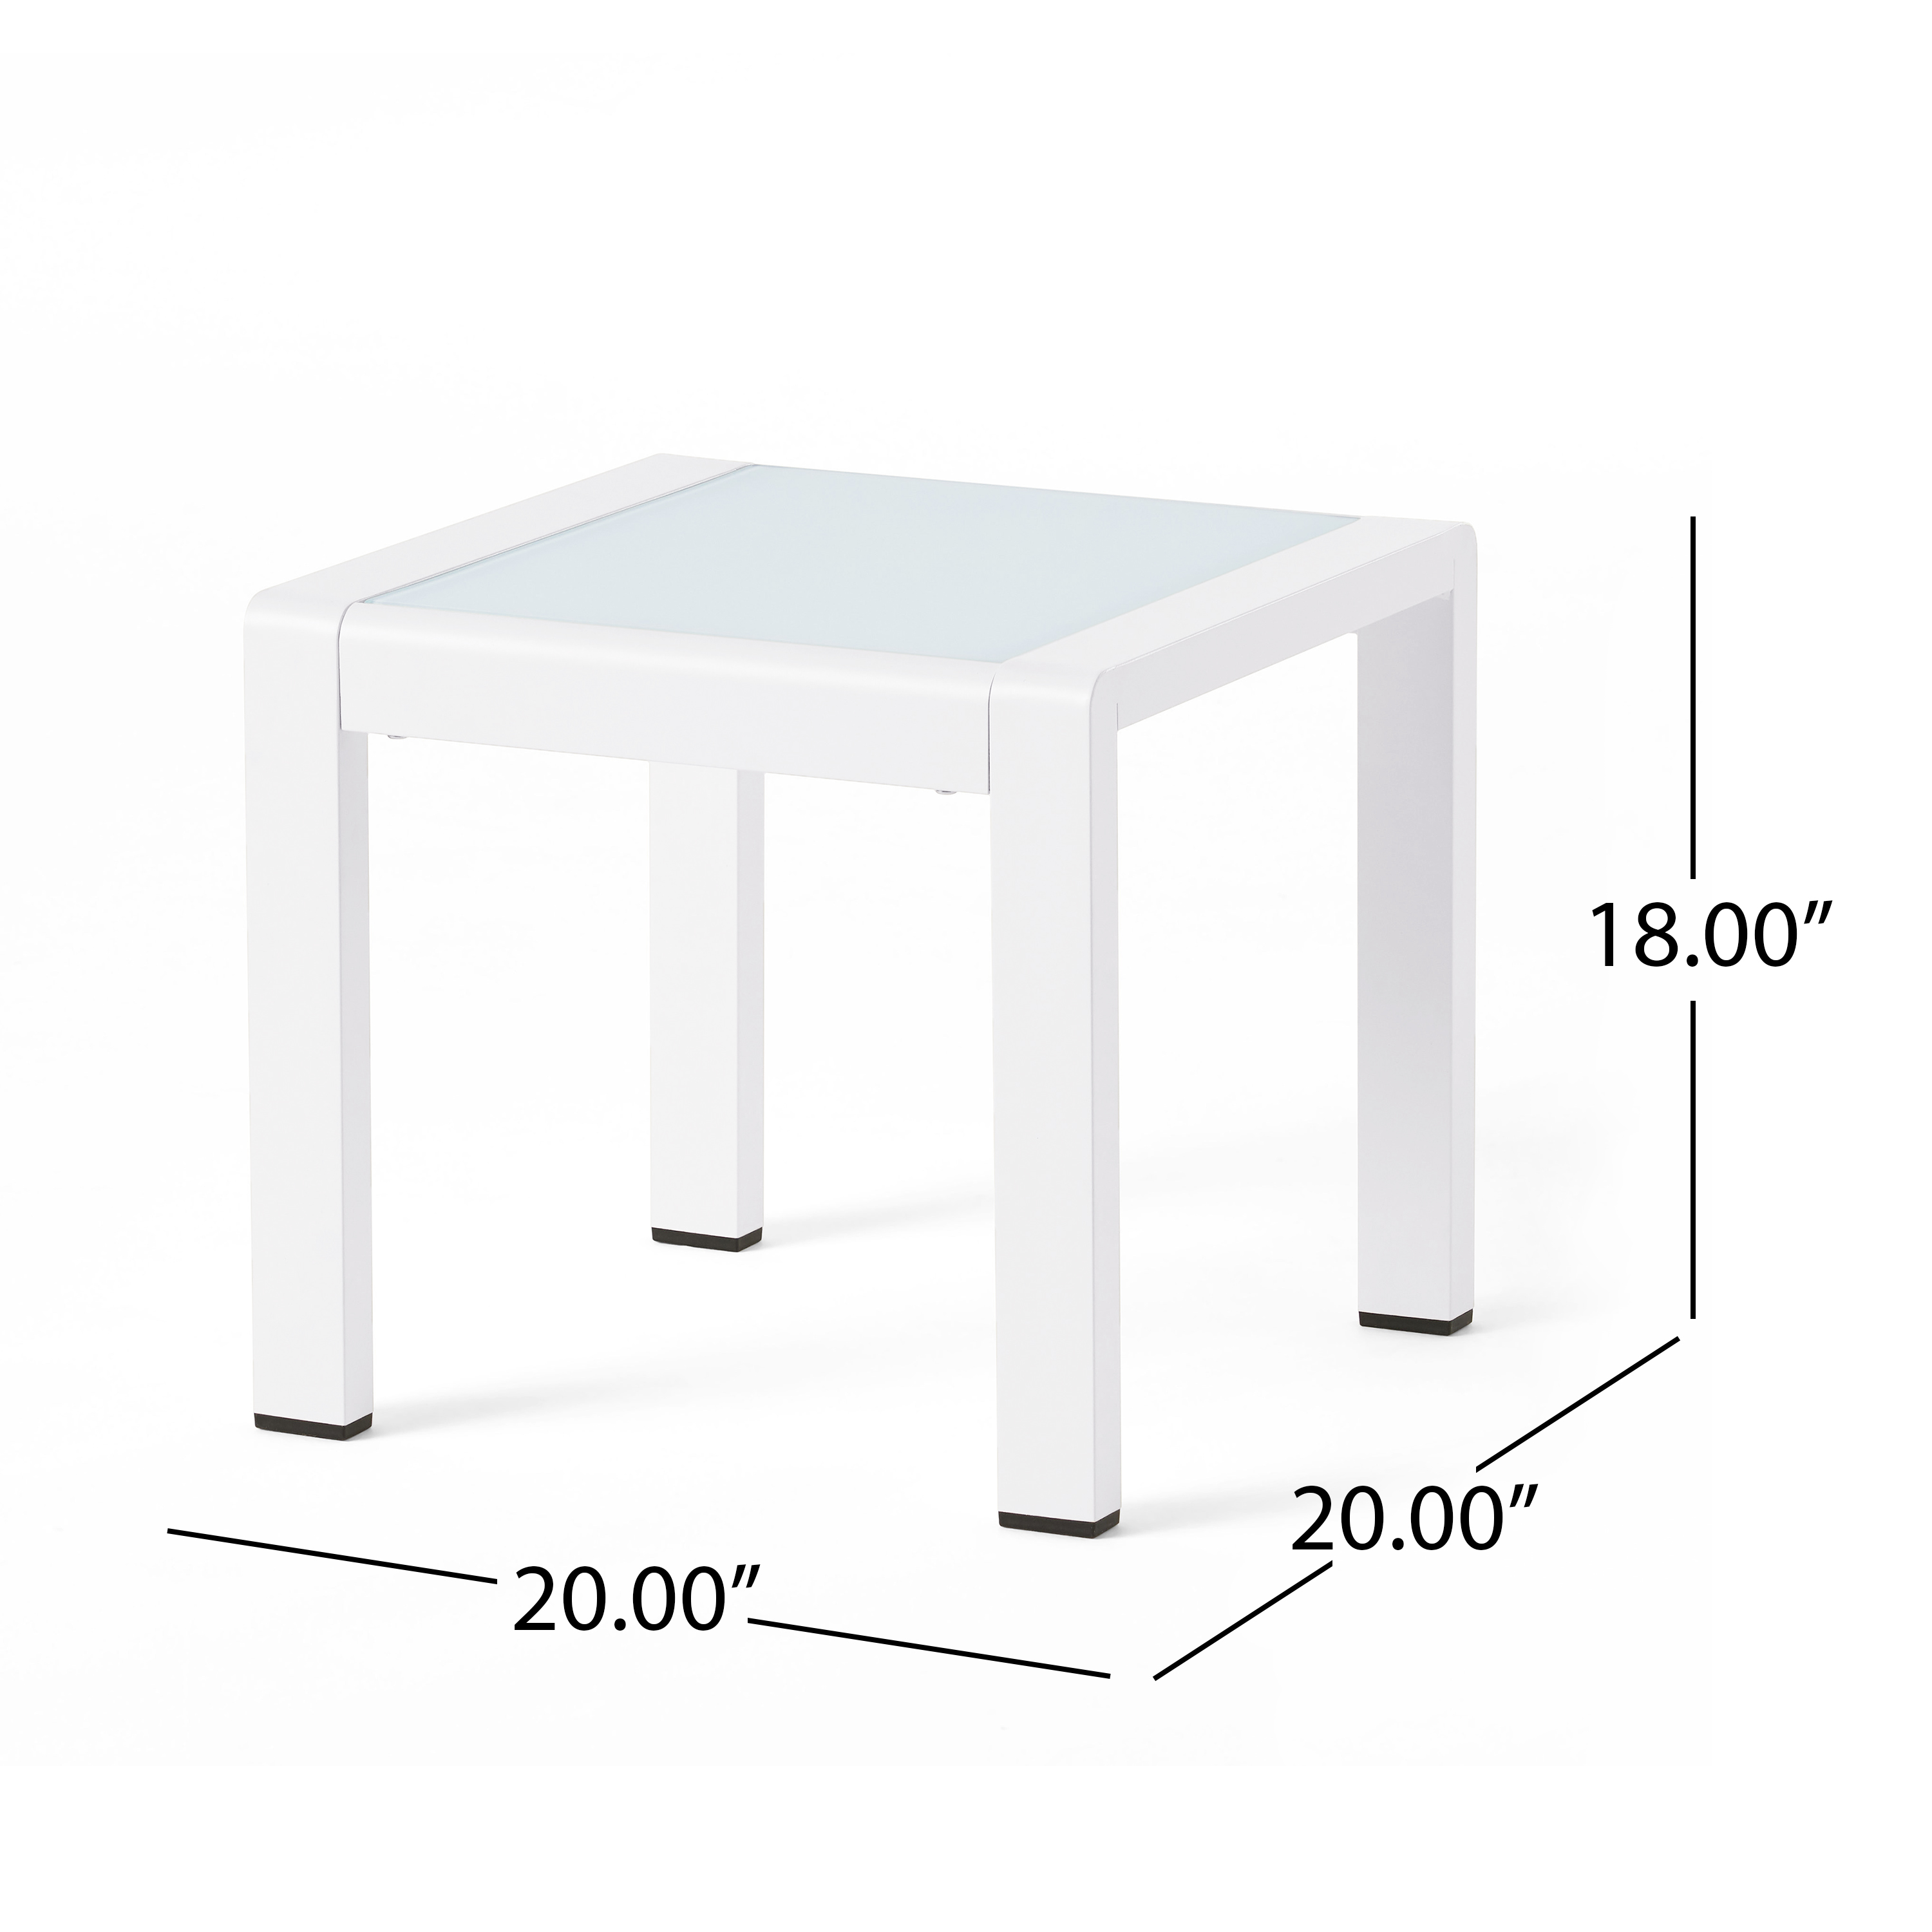 Bunny Coral Outdoor Aluminum Side Table (Set of 2) - image 3 of 8